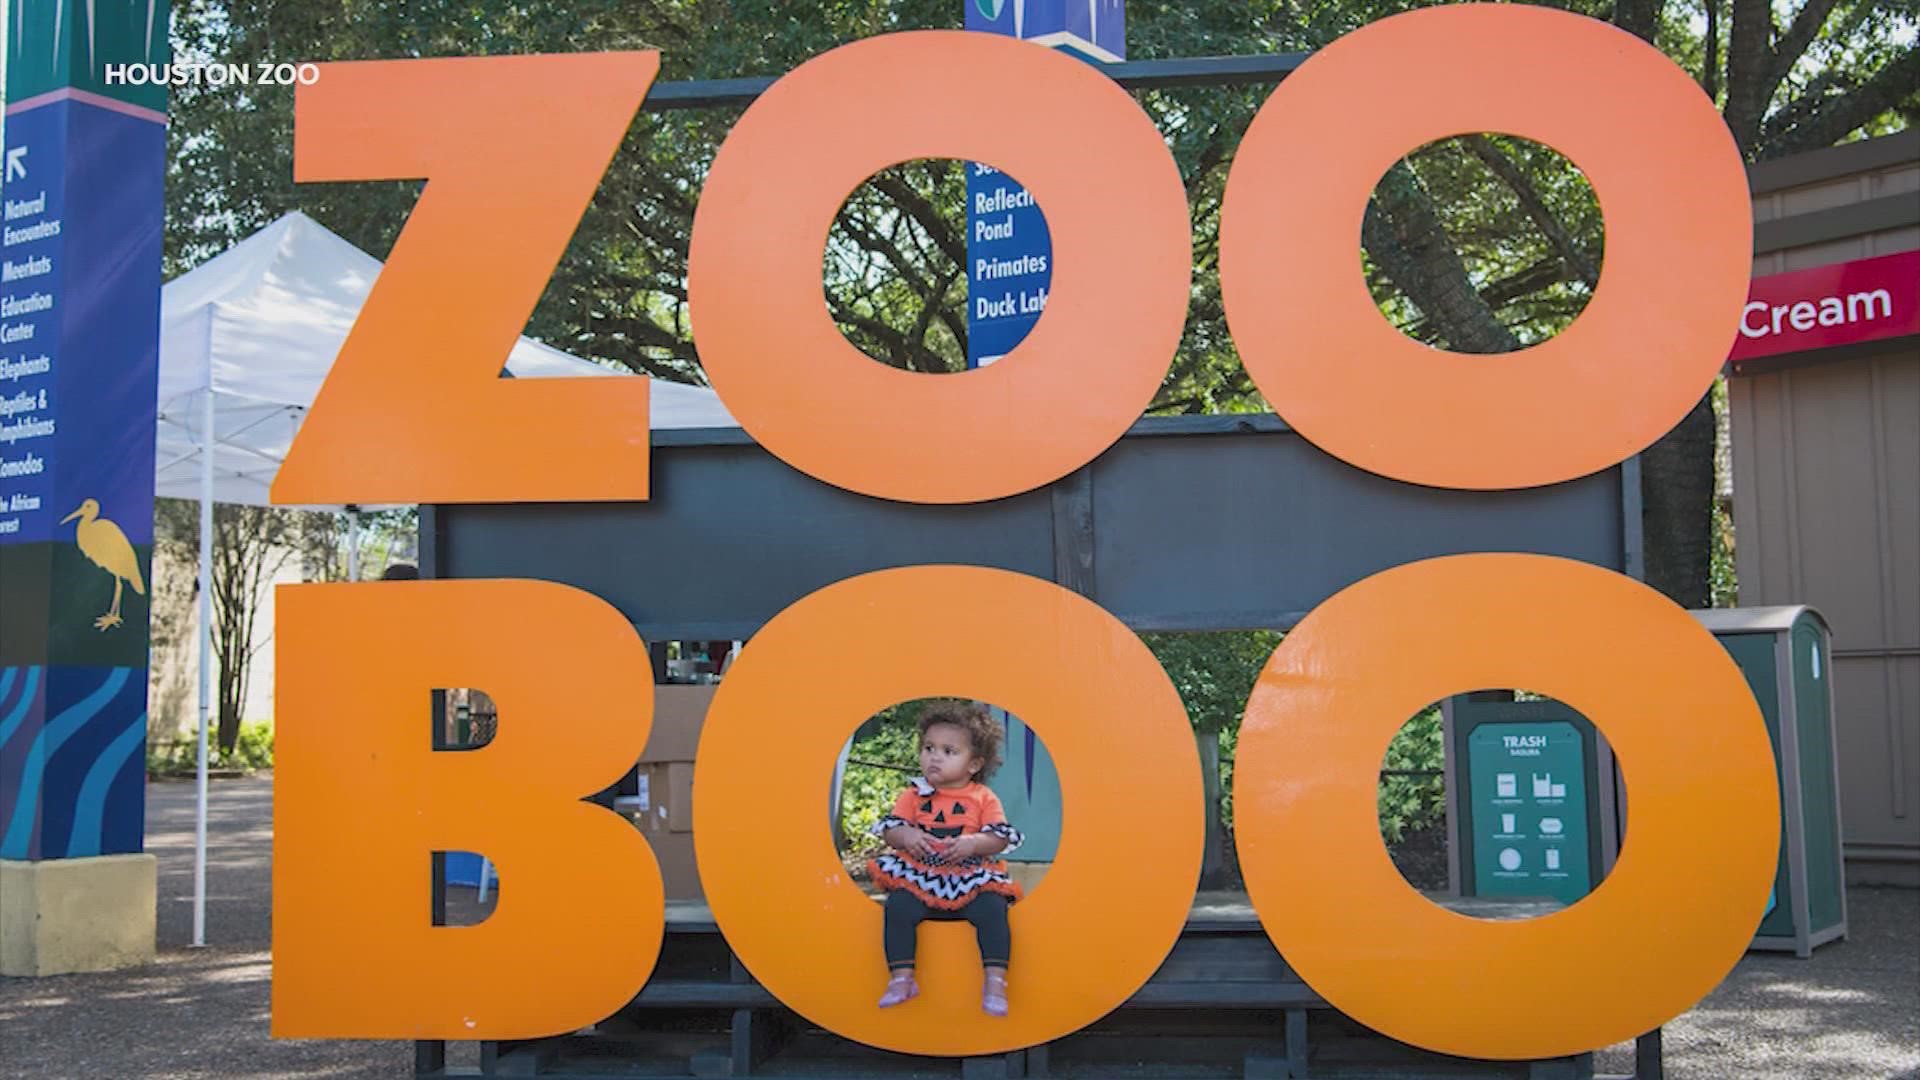 This year, expect the ghost and goblins at the park to stay a little past curfew as the Zoo introduces "Zoo Boo After Hours."